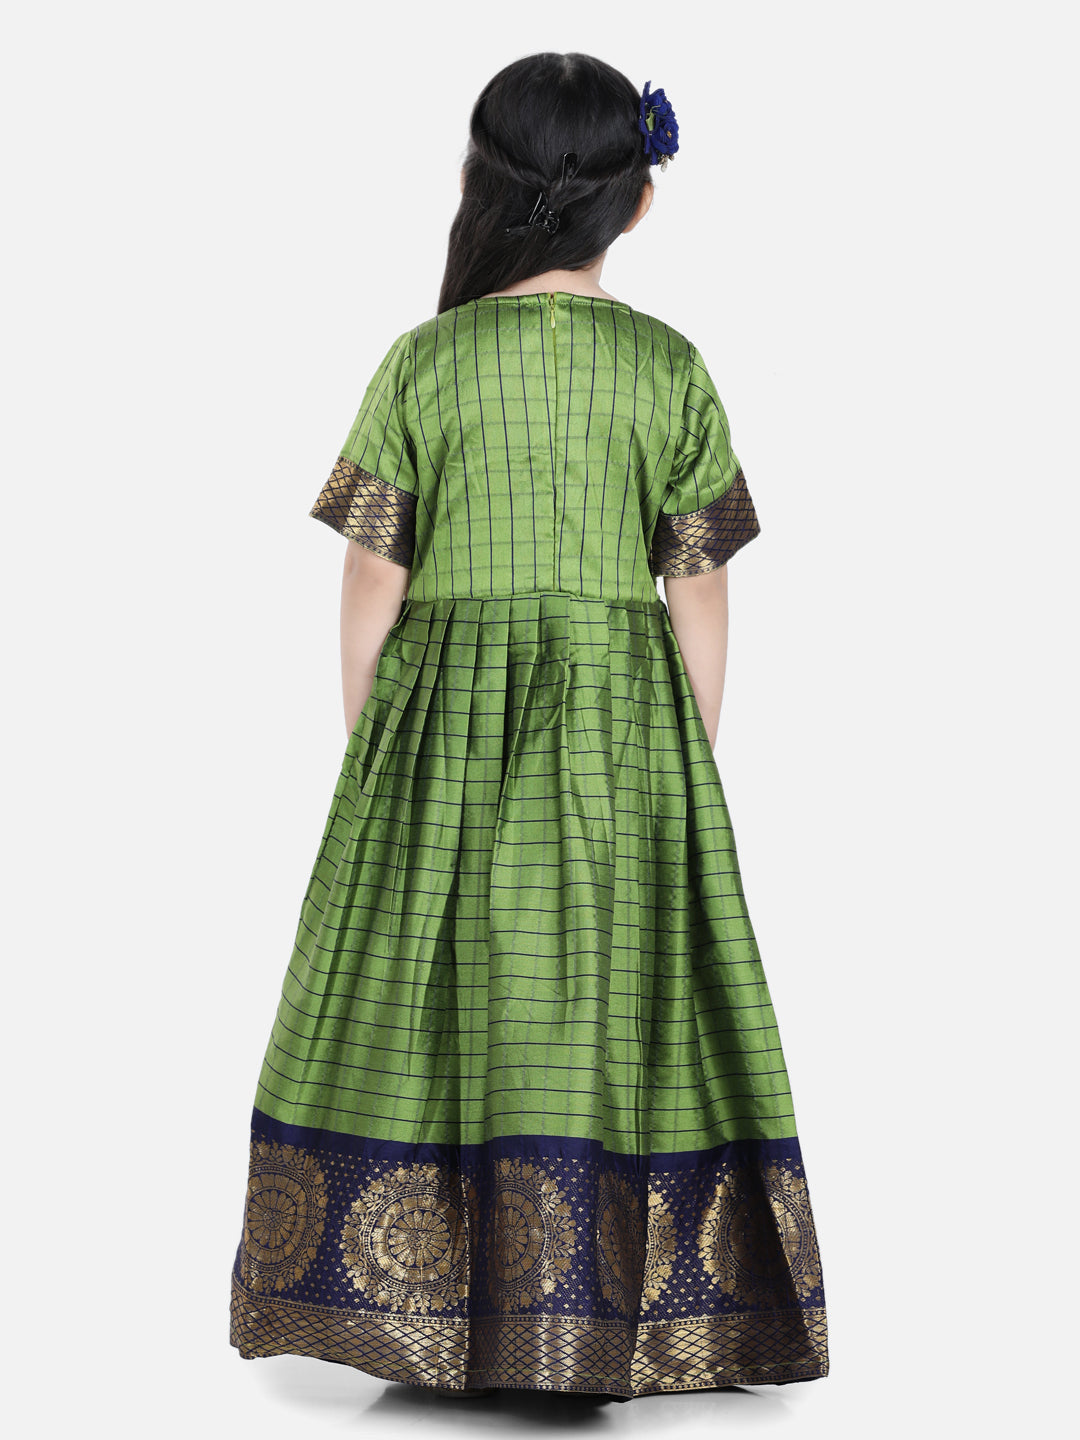 BownBee Silk South Indian Party Gown for Girls- Green